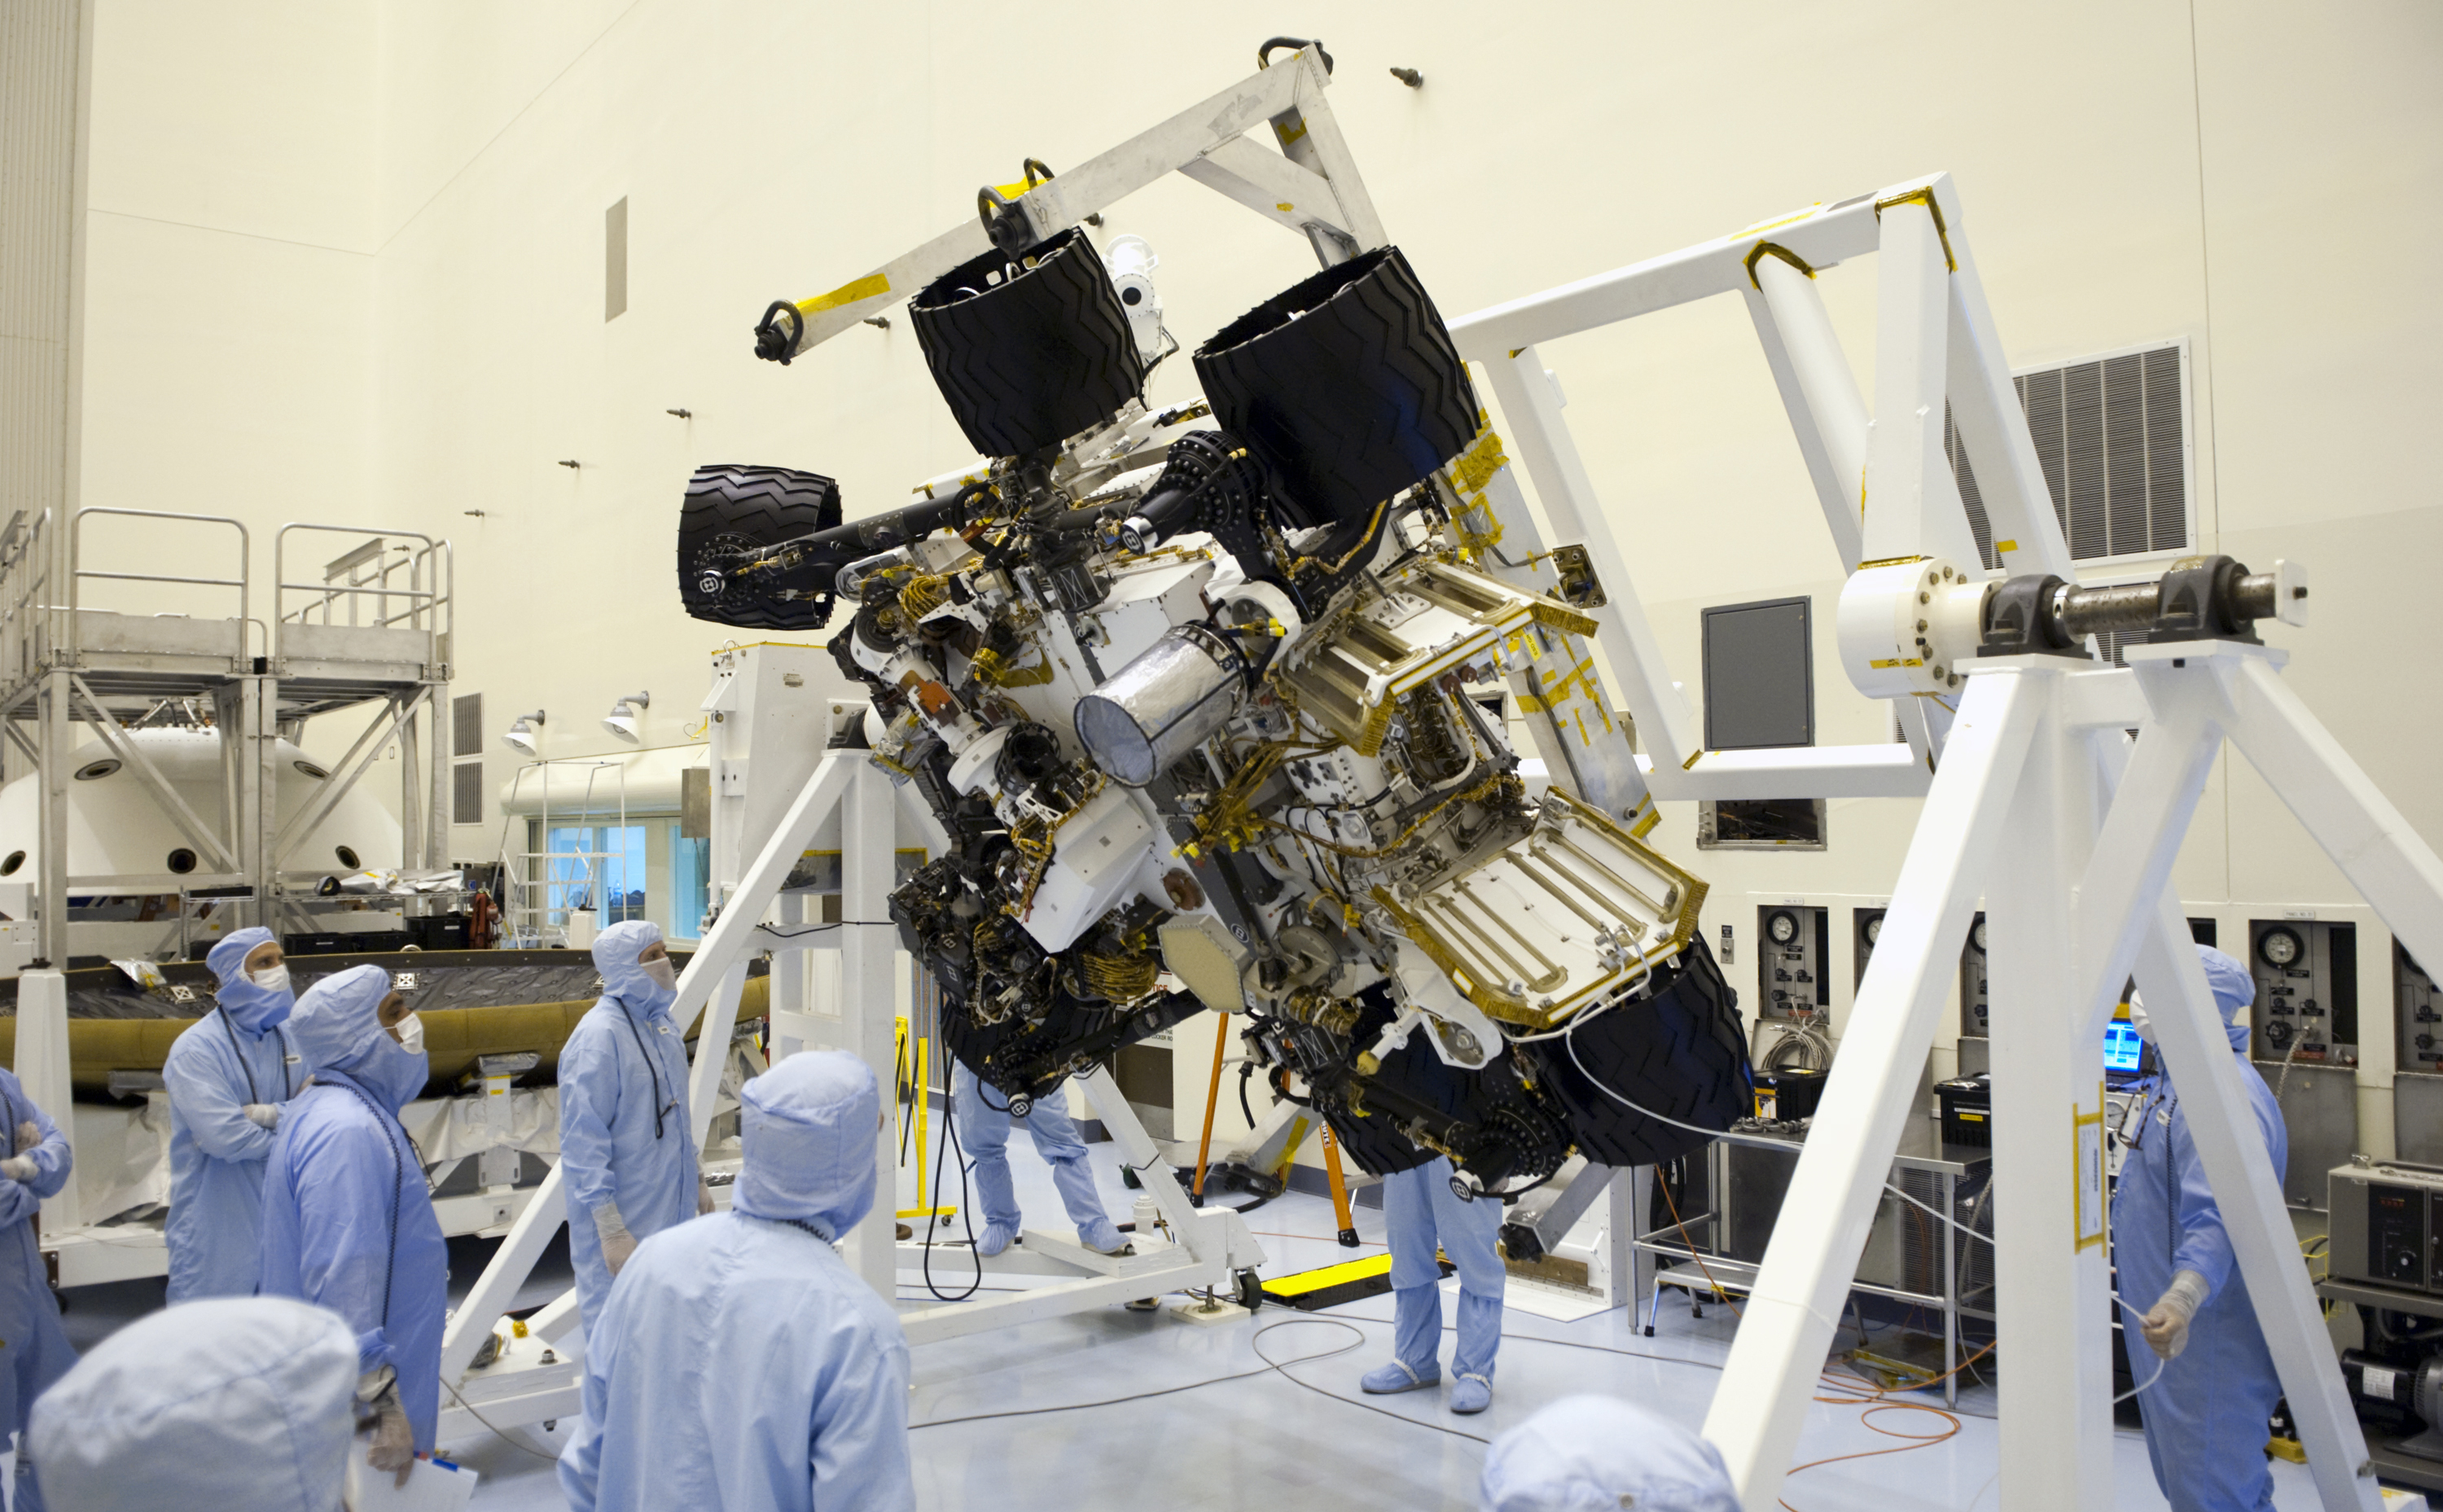 Technicians in the Payload Hazardous Servicing Facility at NASA's Kennedy Space Center in Florida put NASA's Mars Science Laboratory (MSL) rover, known as Curiosity, through a series of rotation tests.